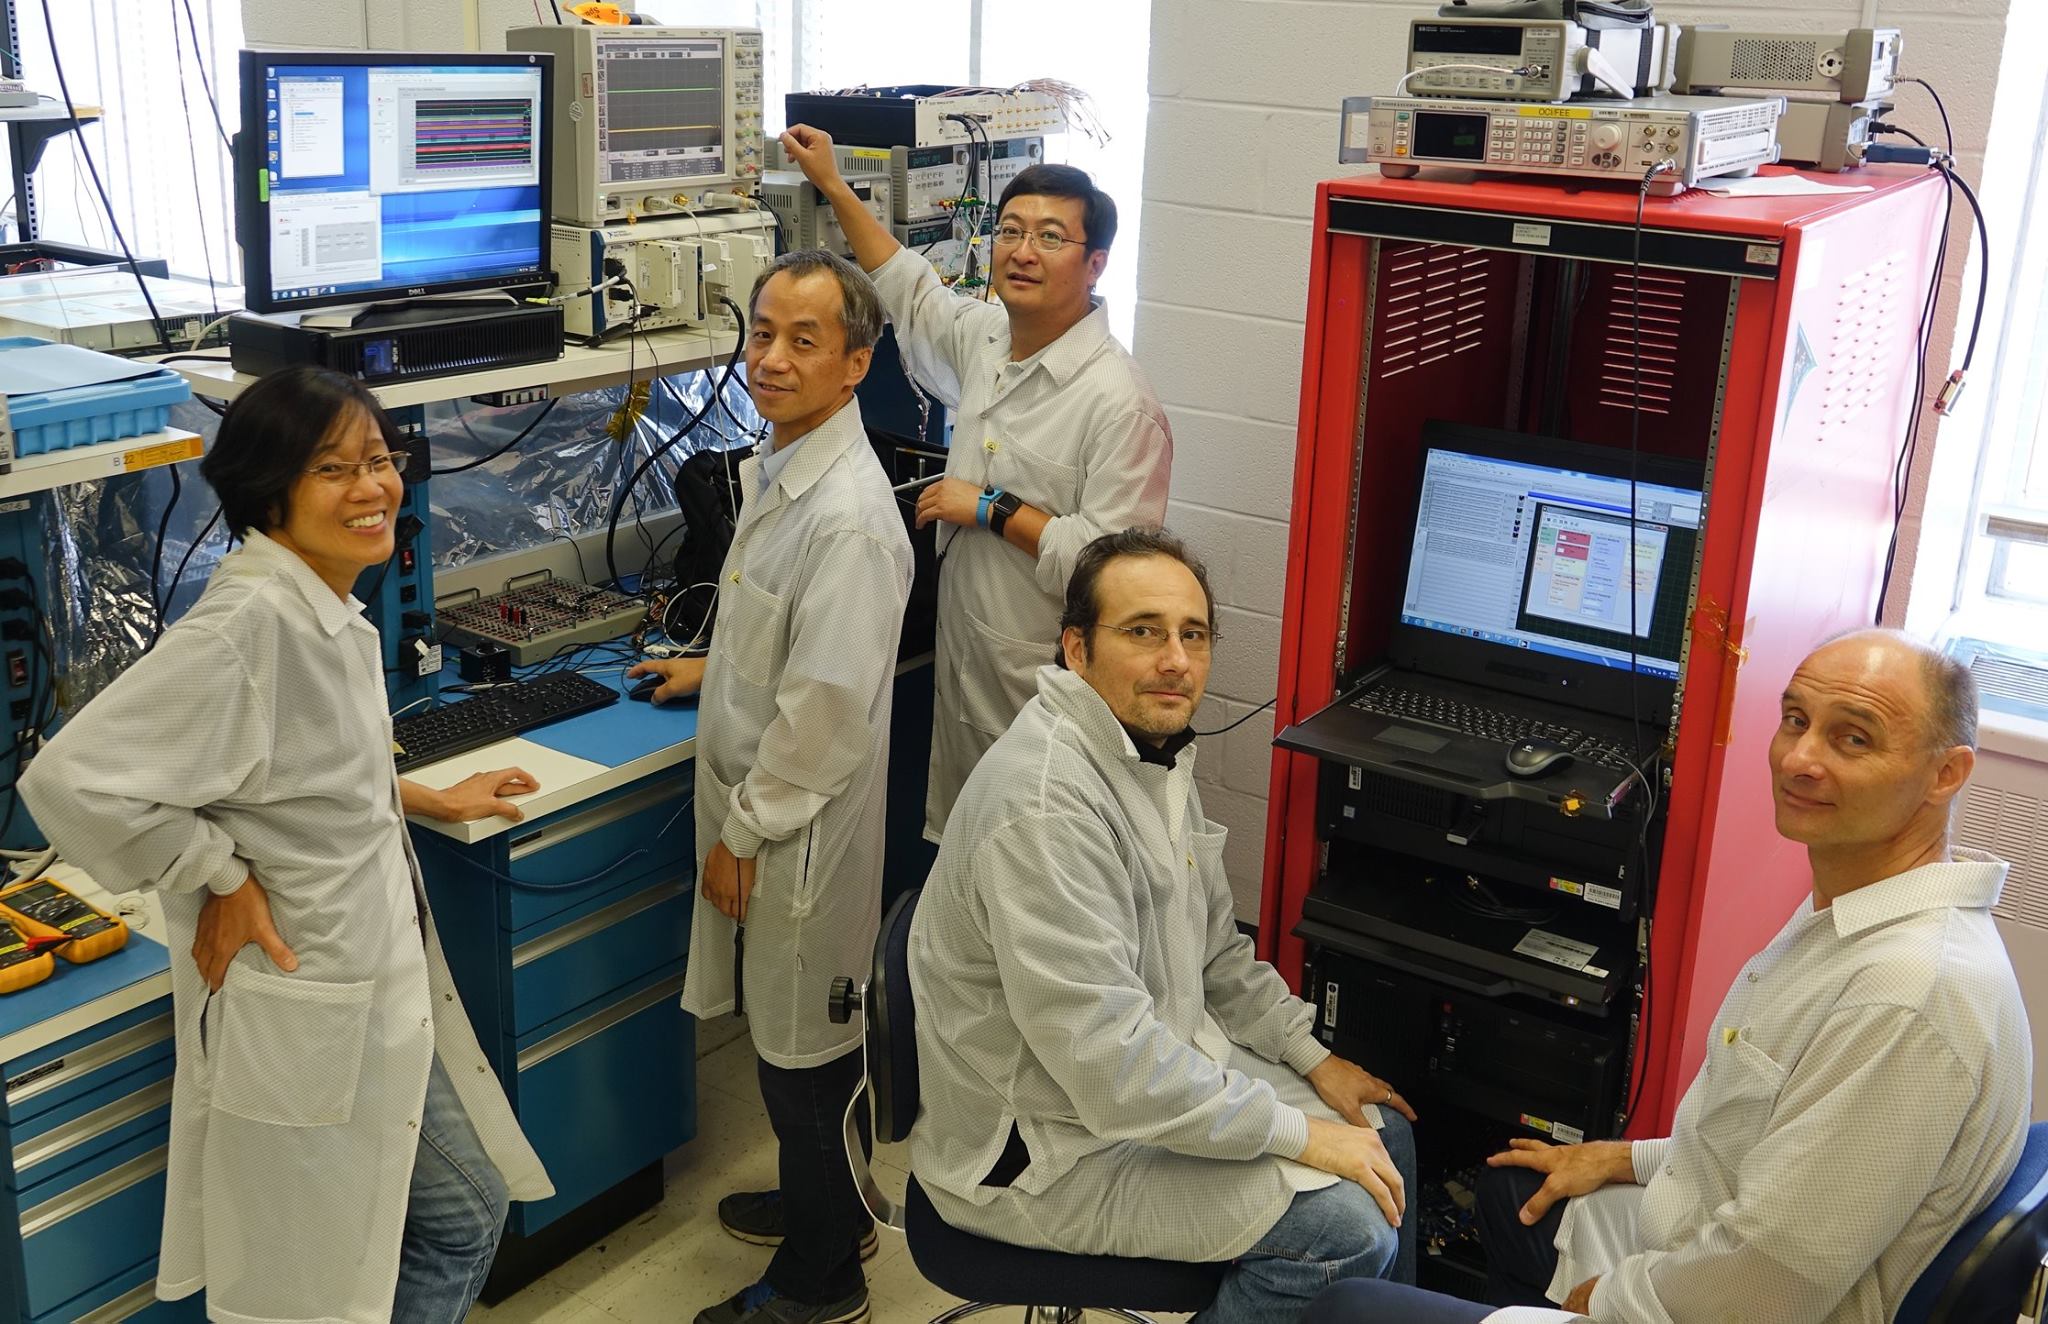 Group photo of PACE team, five people in lab coats, four men and one woman 